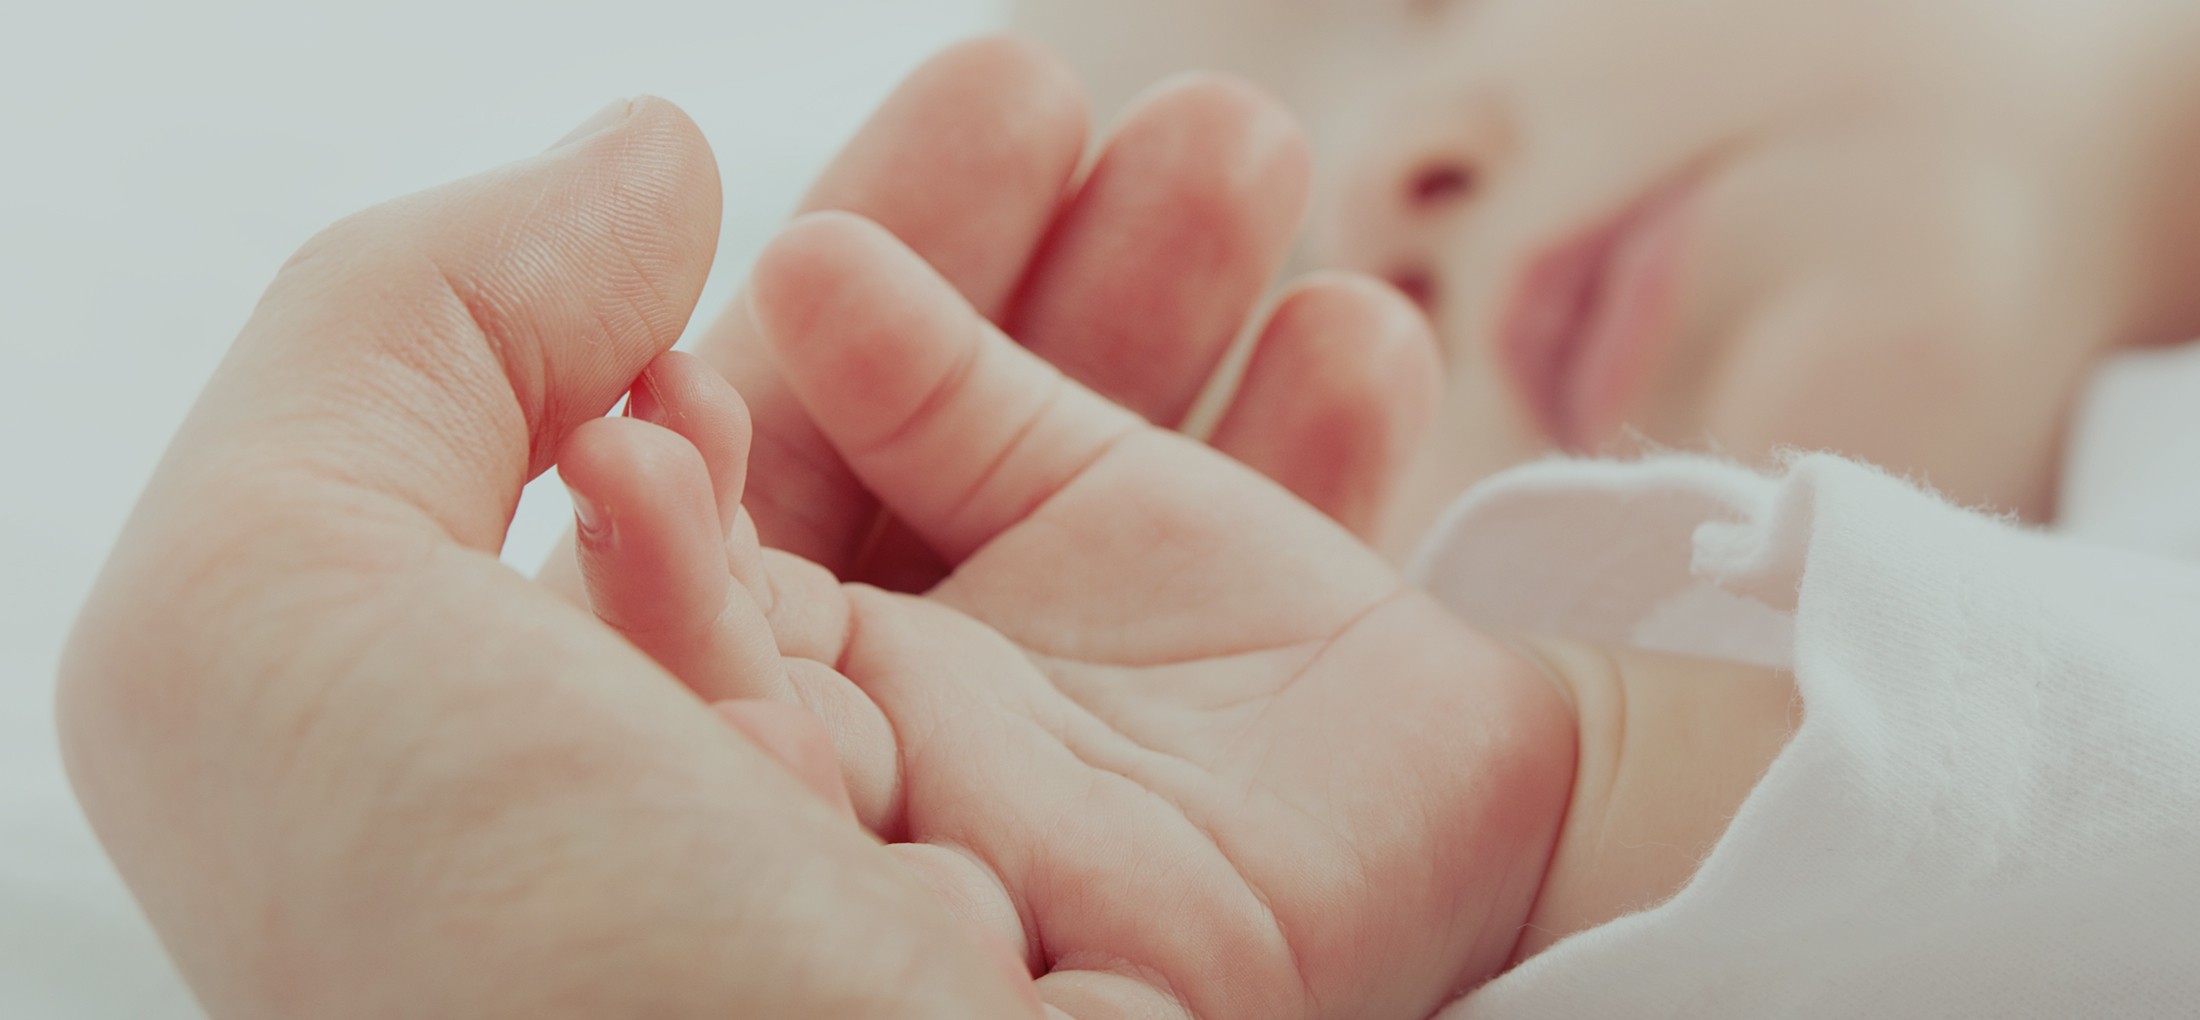 A baby's hand is being held by someone's hand.